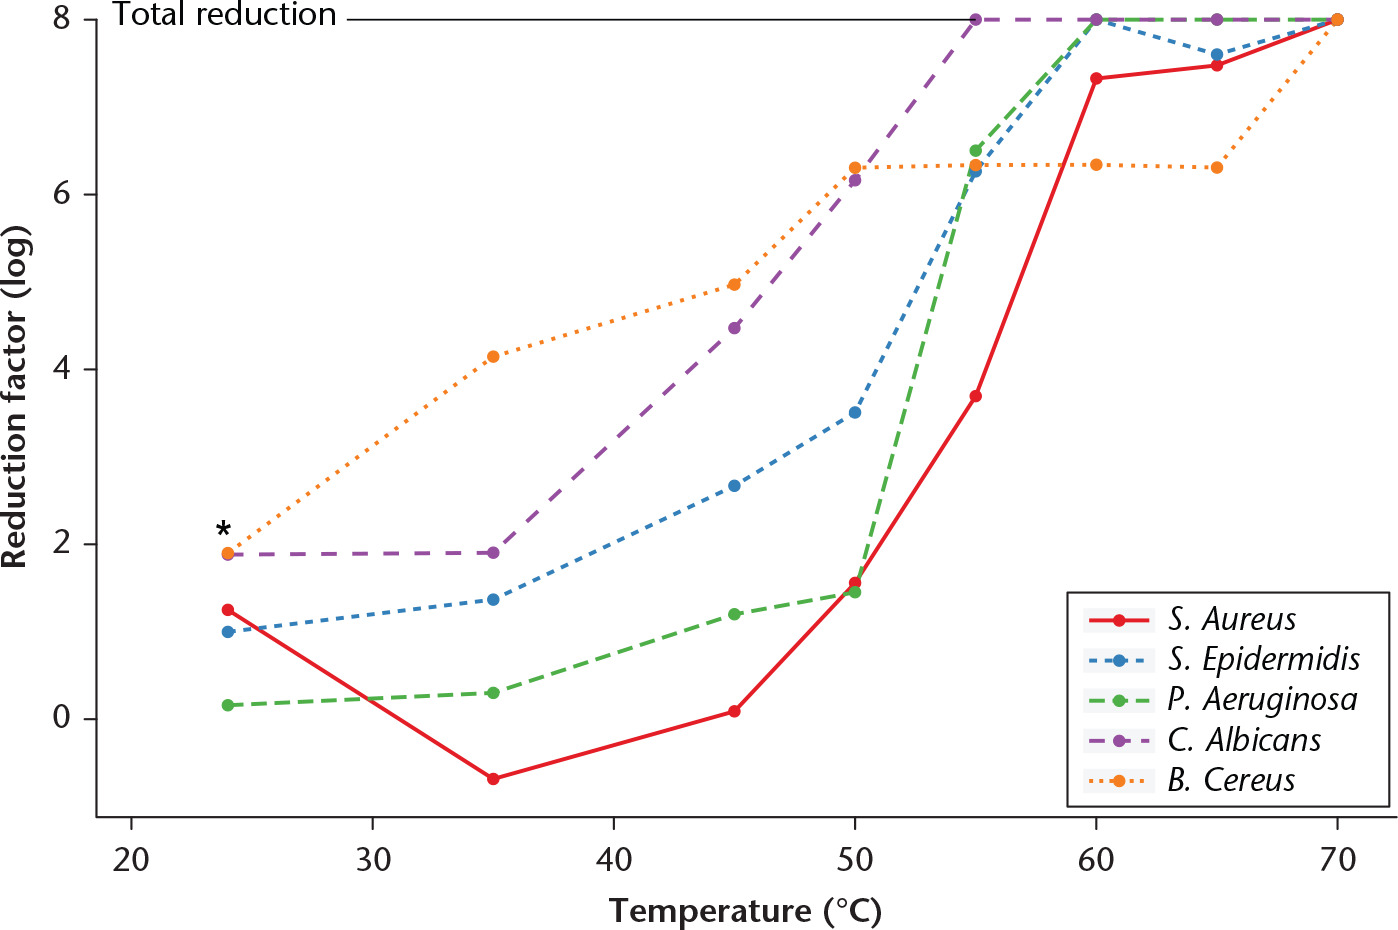 Fig. 3 
            Association between temperature exposure and reduction of micro-organisms for Staphylococcus epidermidis, Staphylococcus aureus, Pseudomonas aeruginosa, spore-forming Bacillus cereus and yeast Candida albicans. Micro-organisms were exposed to the target temperature for 3.5 minutes. To determine the reduction, colony counts after the heating were compared with those before the heating. *Control 1: the positive control (titanium cylinder and no PEMF, see results for details) is at room temperature and plotted for each micro-organism. At 8-log reduction, the reduction of micro-organisms is total.
          